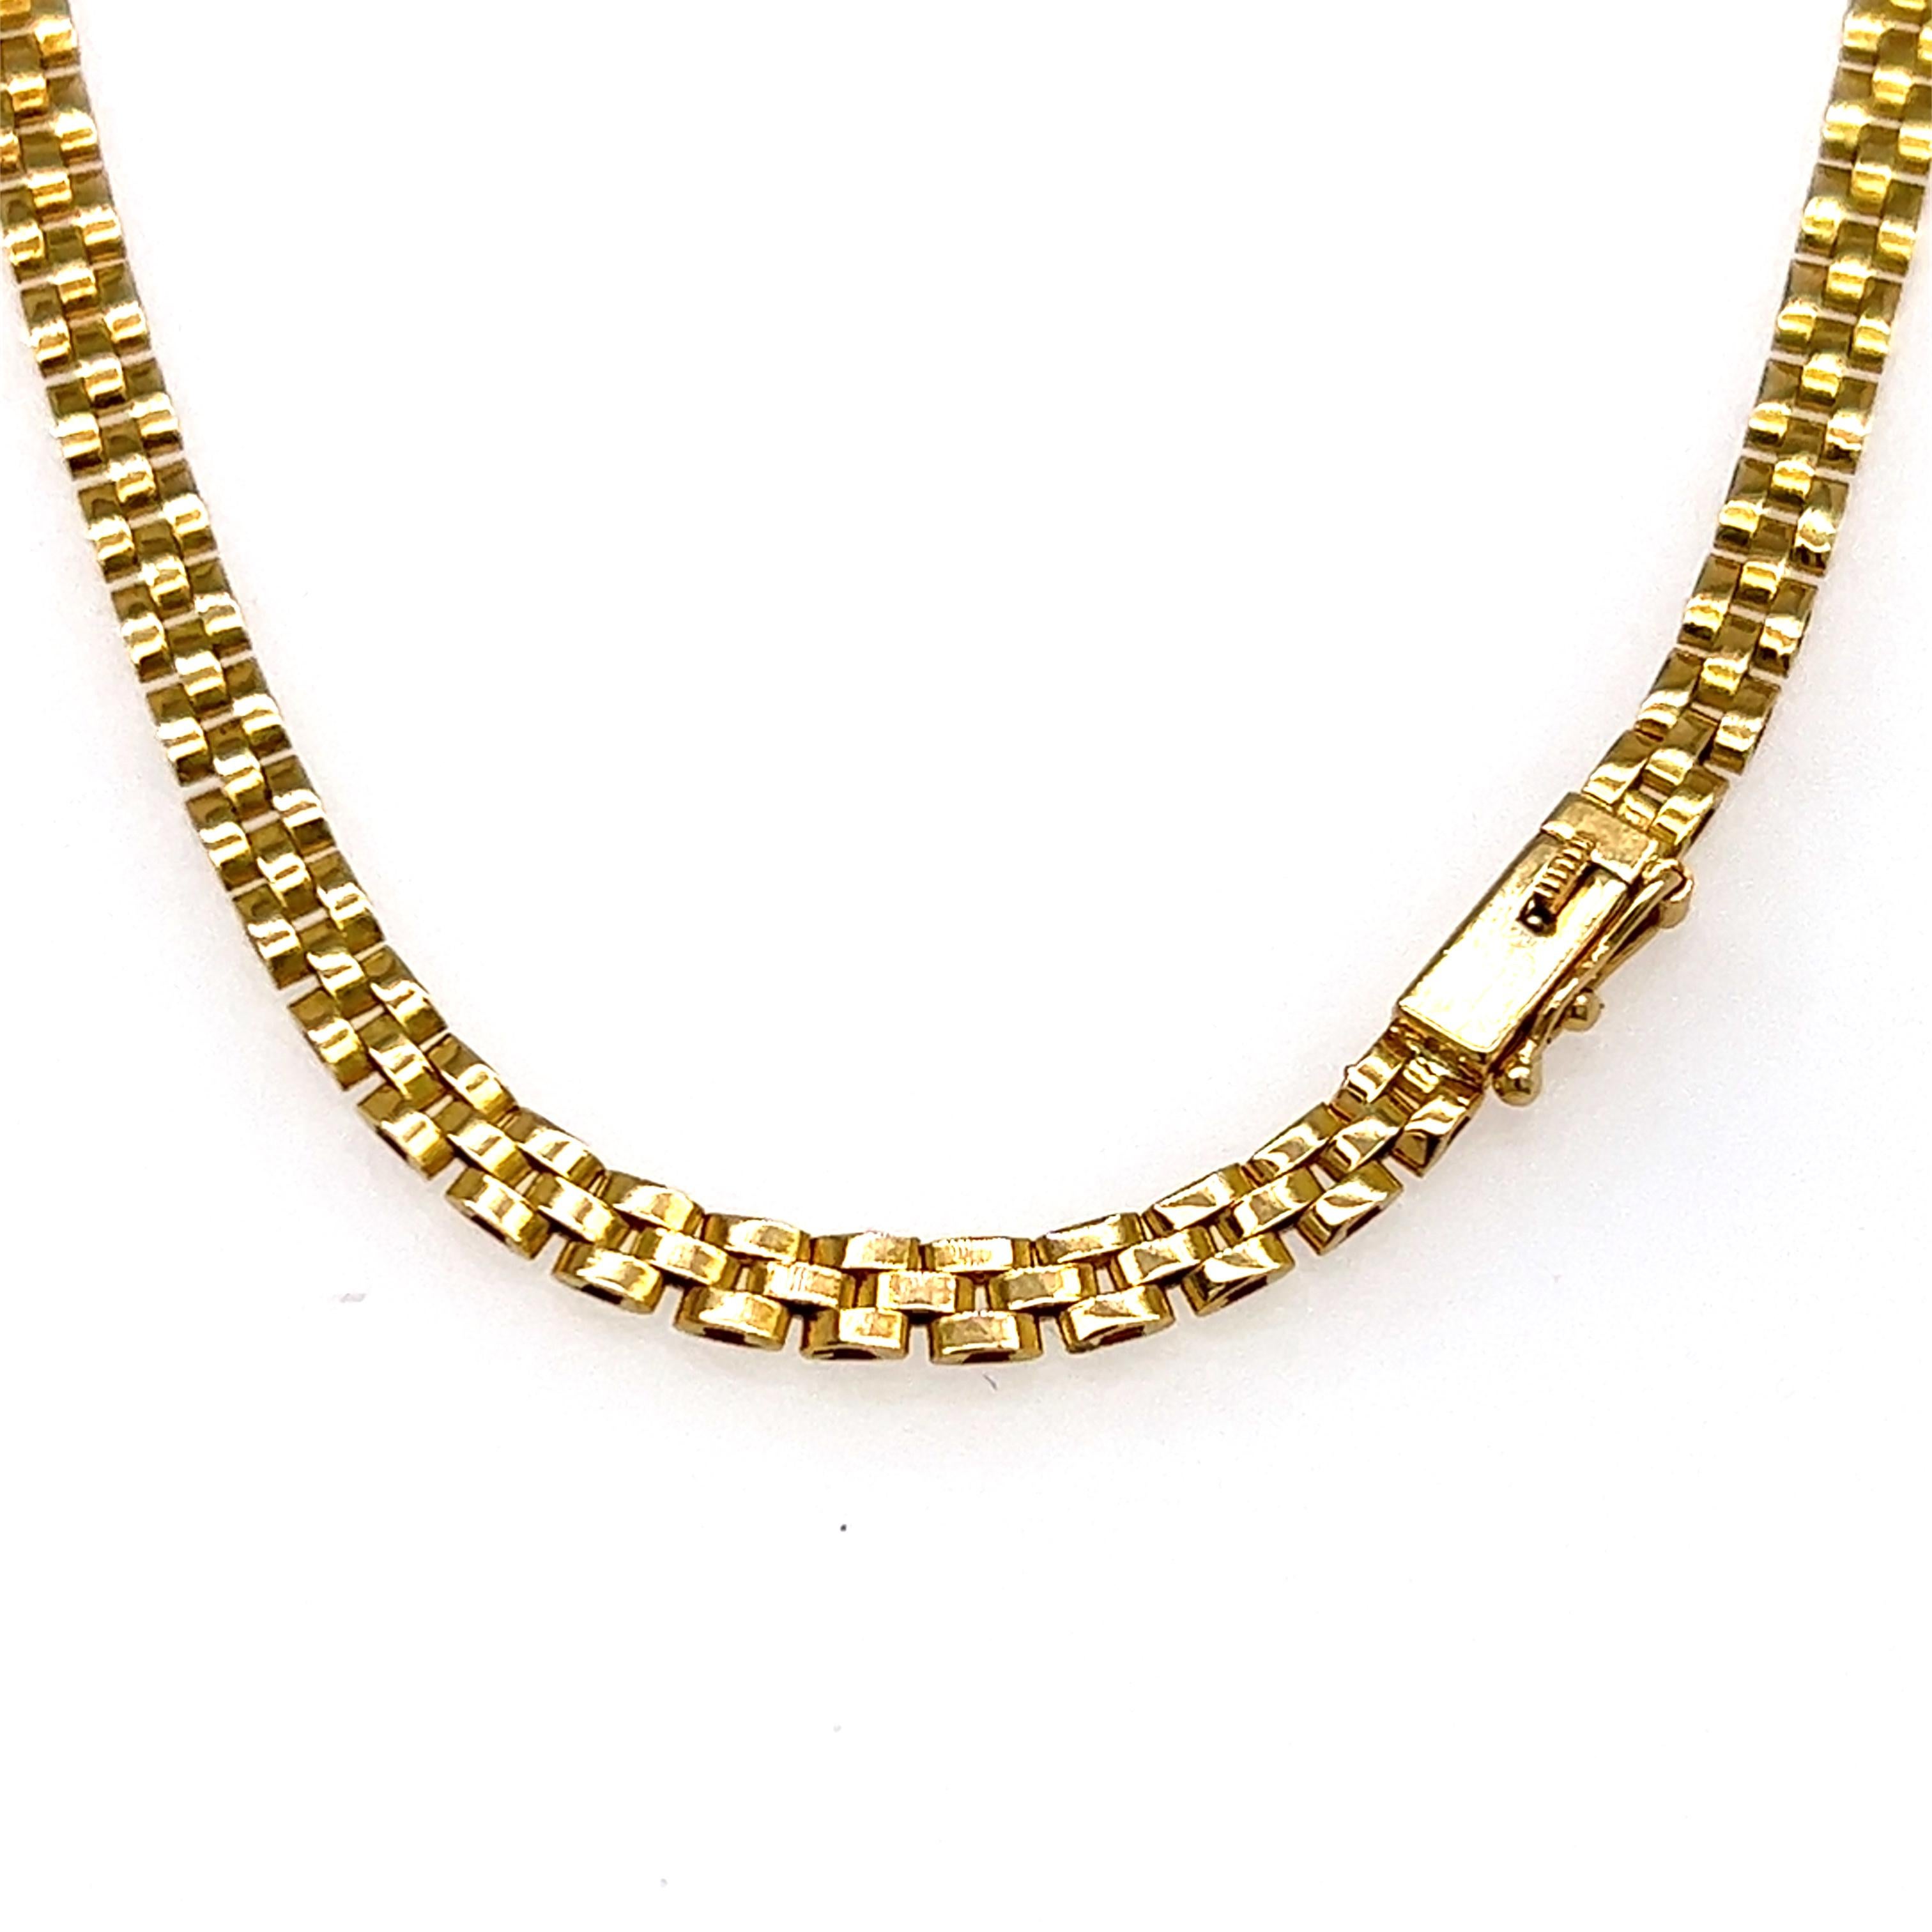 One 18 karat yellow gold 22-inch brick link pendant necklace featuring sixty-two (62) baguette diamonds in a freeform pattern, approximately 1.50-carat total weight with matching G/H color and VS/SI clarity.  The necklace is complete with a box